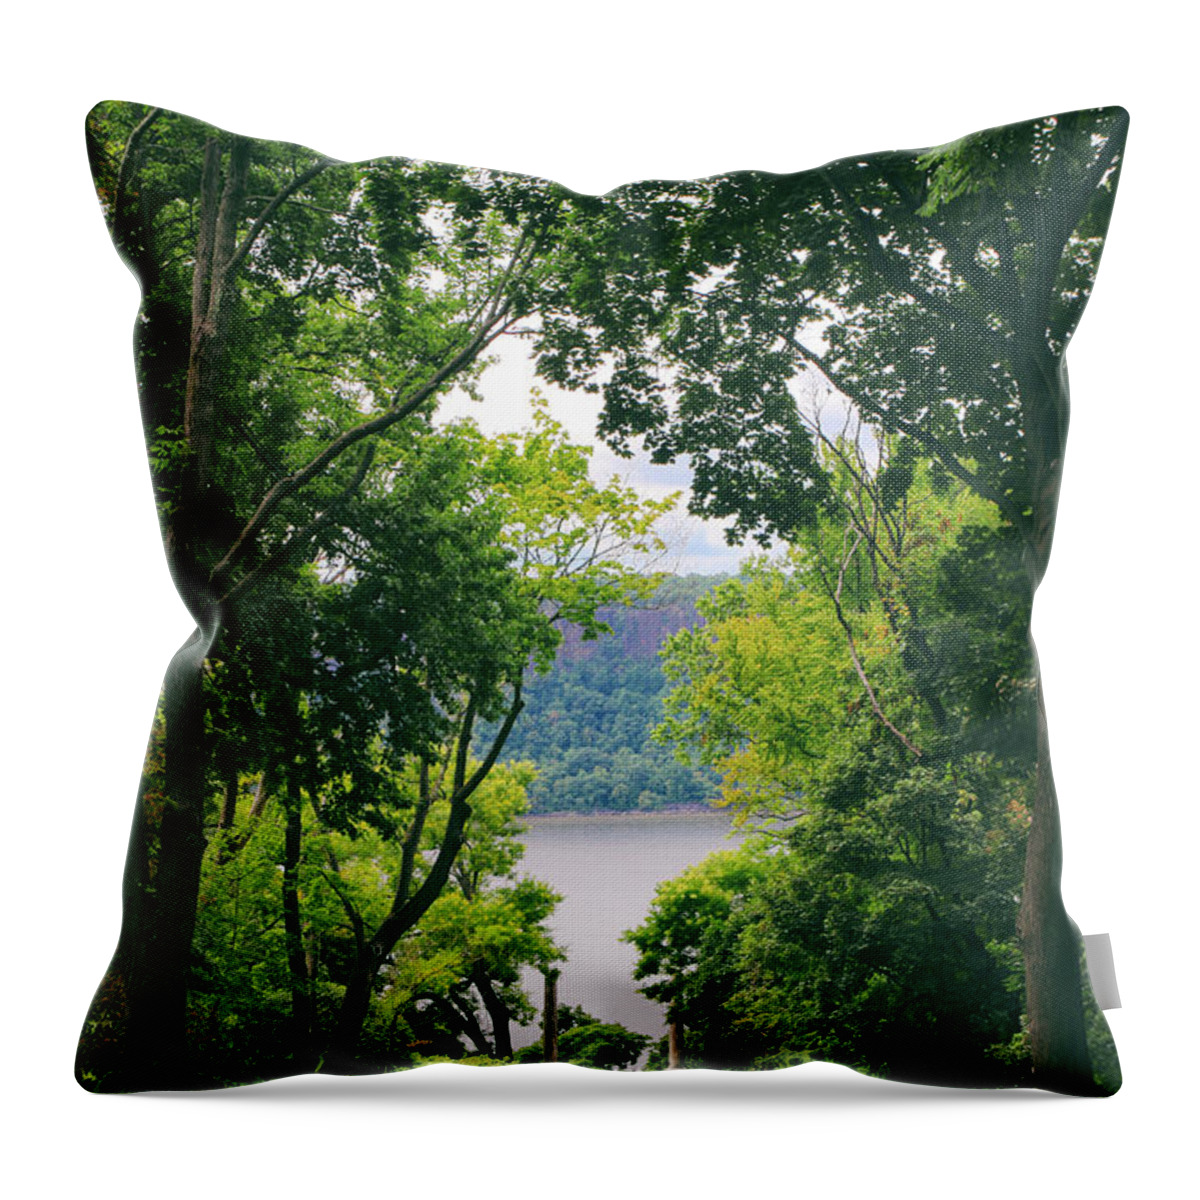 Untermyer Garden Throw Pillow featuring the photograph Vista View by Jessica Jenney